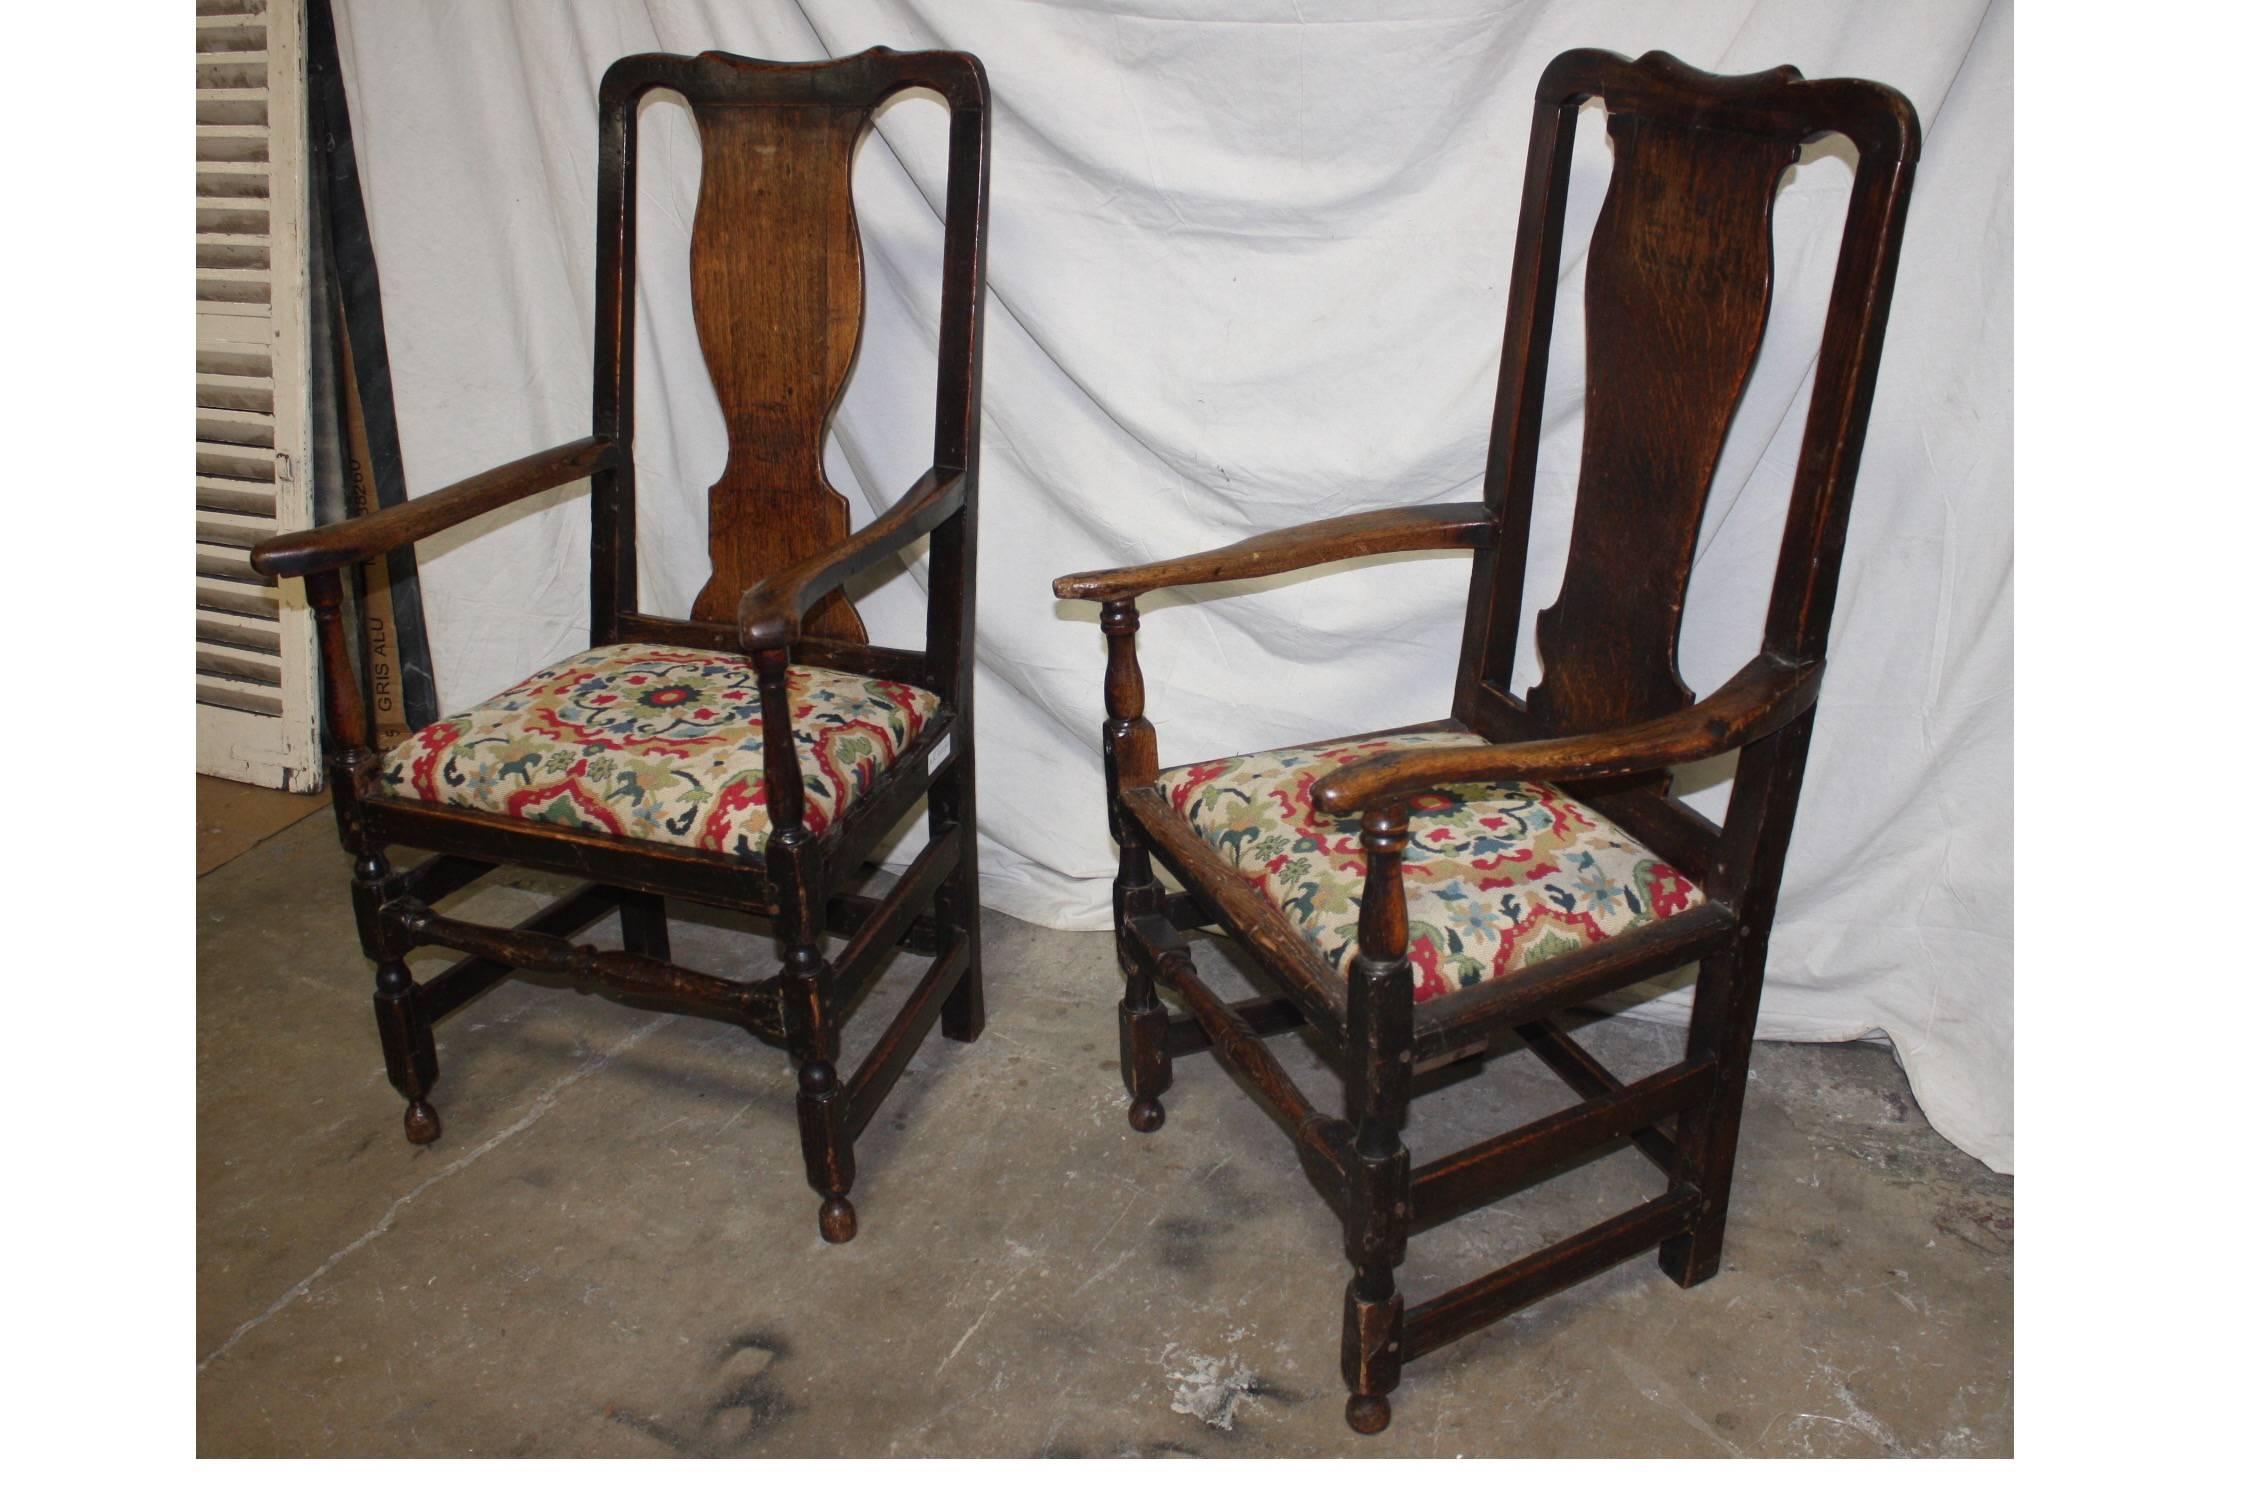 Magnificent Pair of 17th Century Armchairs 2